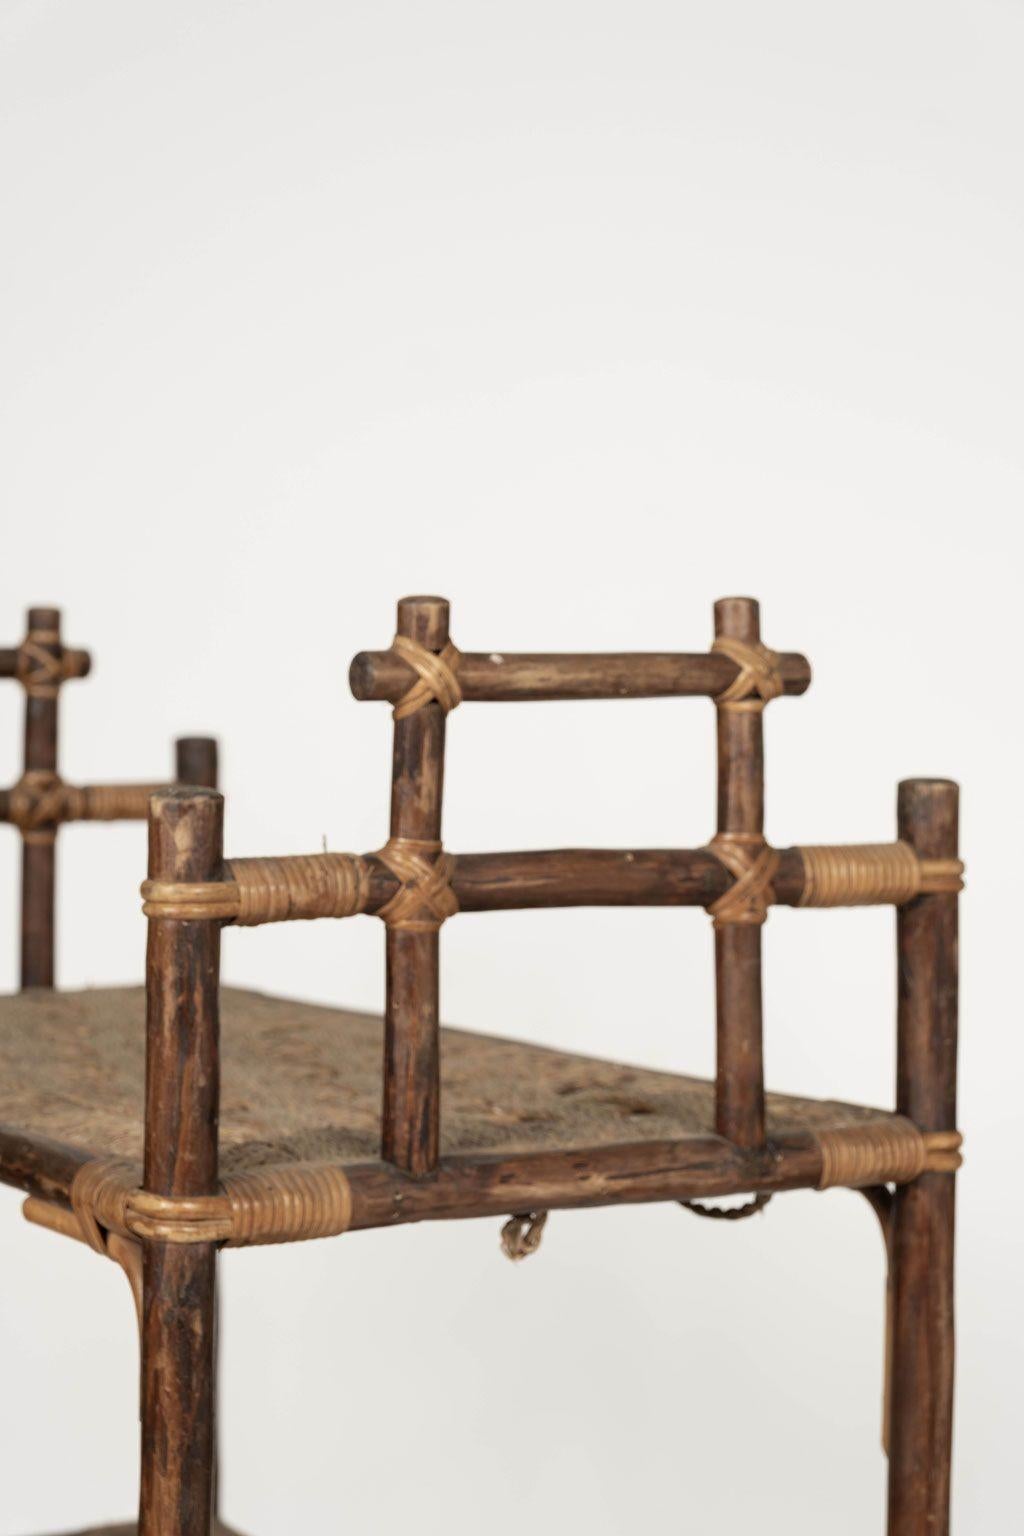 Late 19th century petite French bamboo three-shelf étagère. Shelves' surfaces are woven sisal.